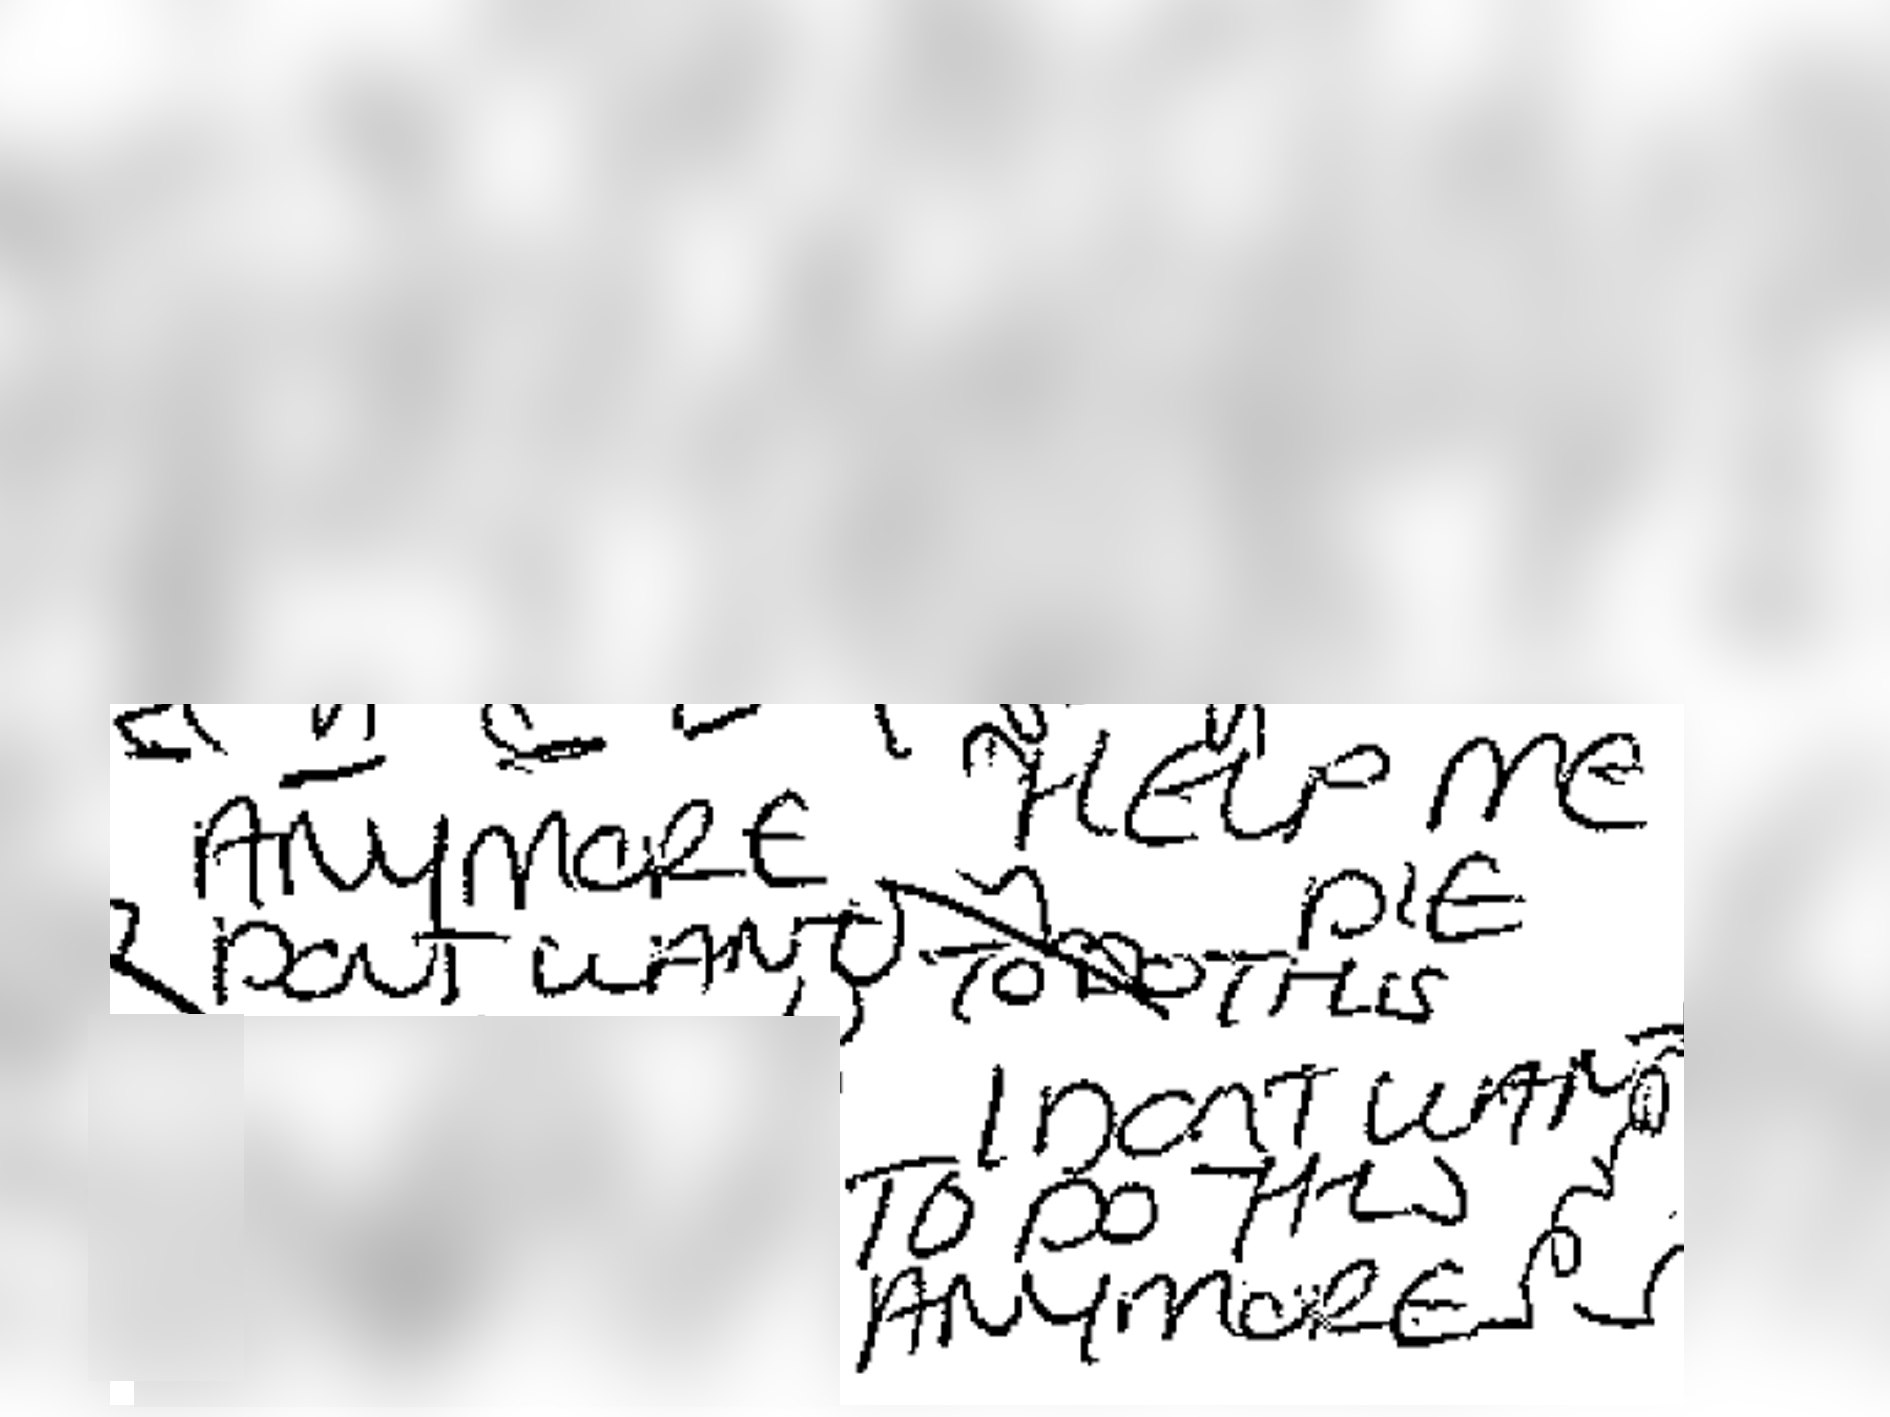 Handwritten messages uncovered at the time of Lucy Letbys arrest in July 2018. Image: Cheshire Constabulary.